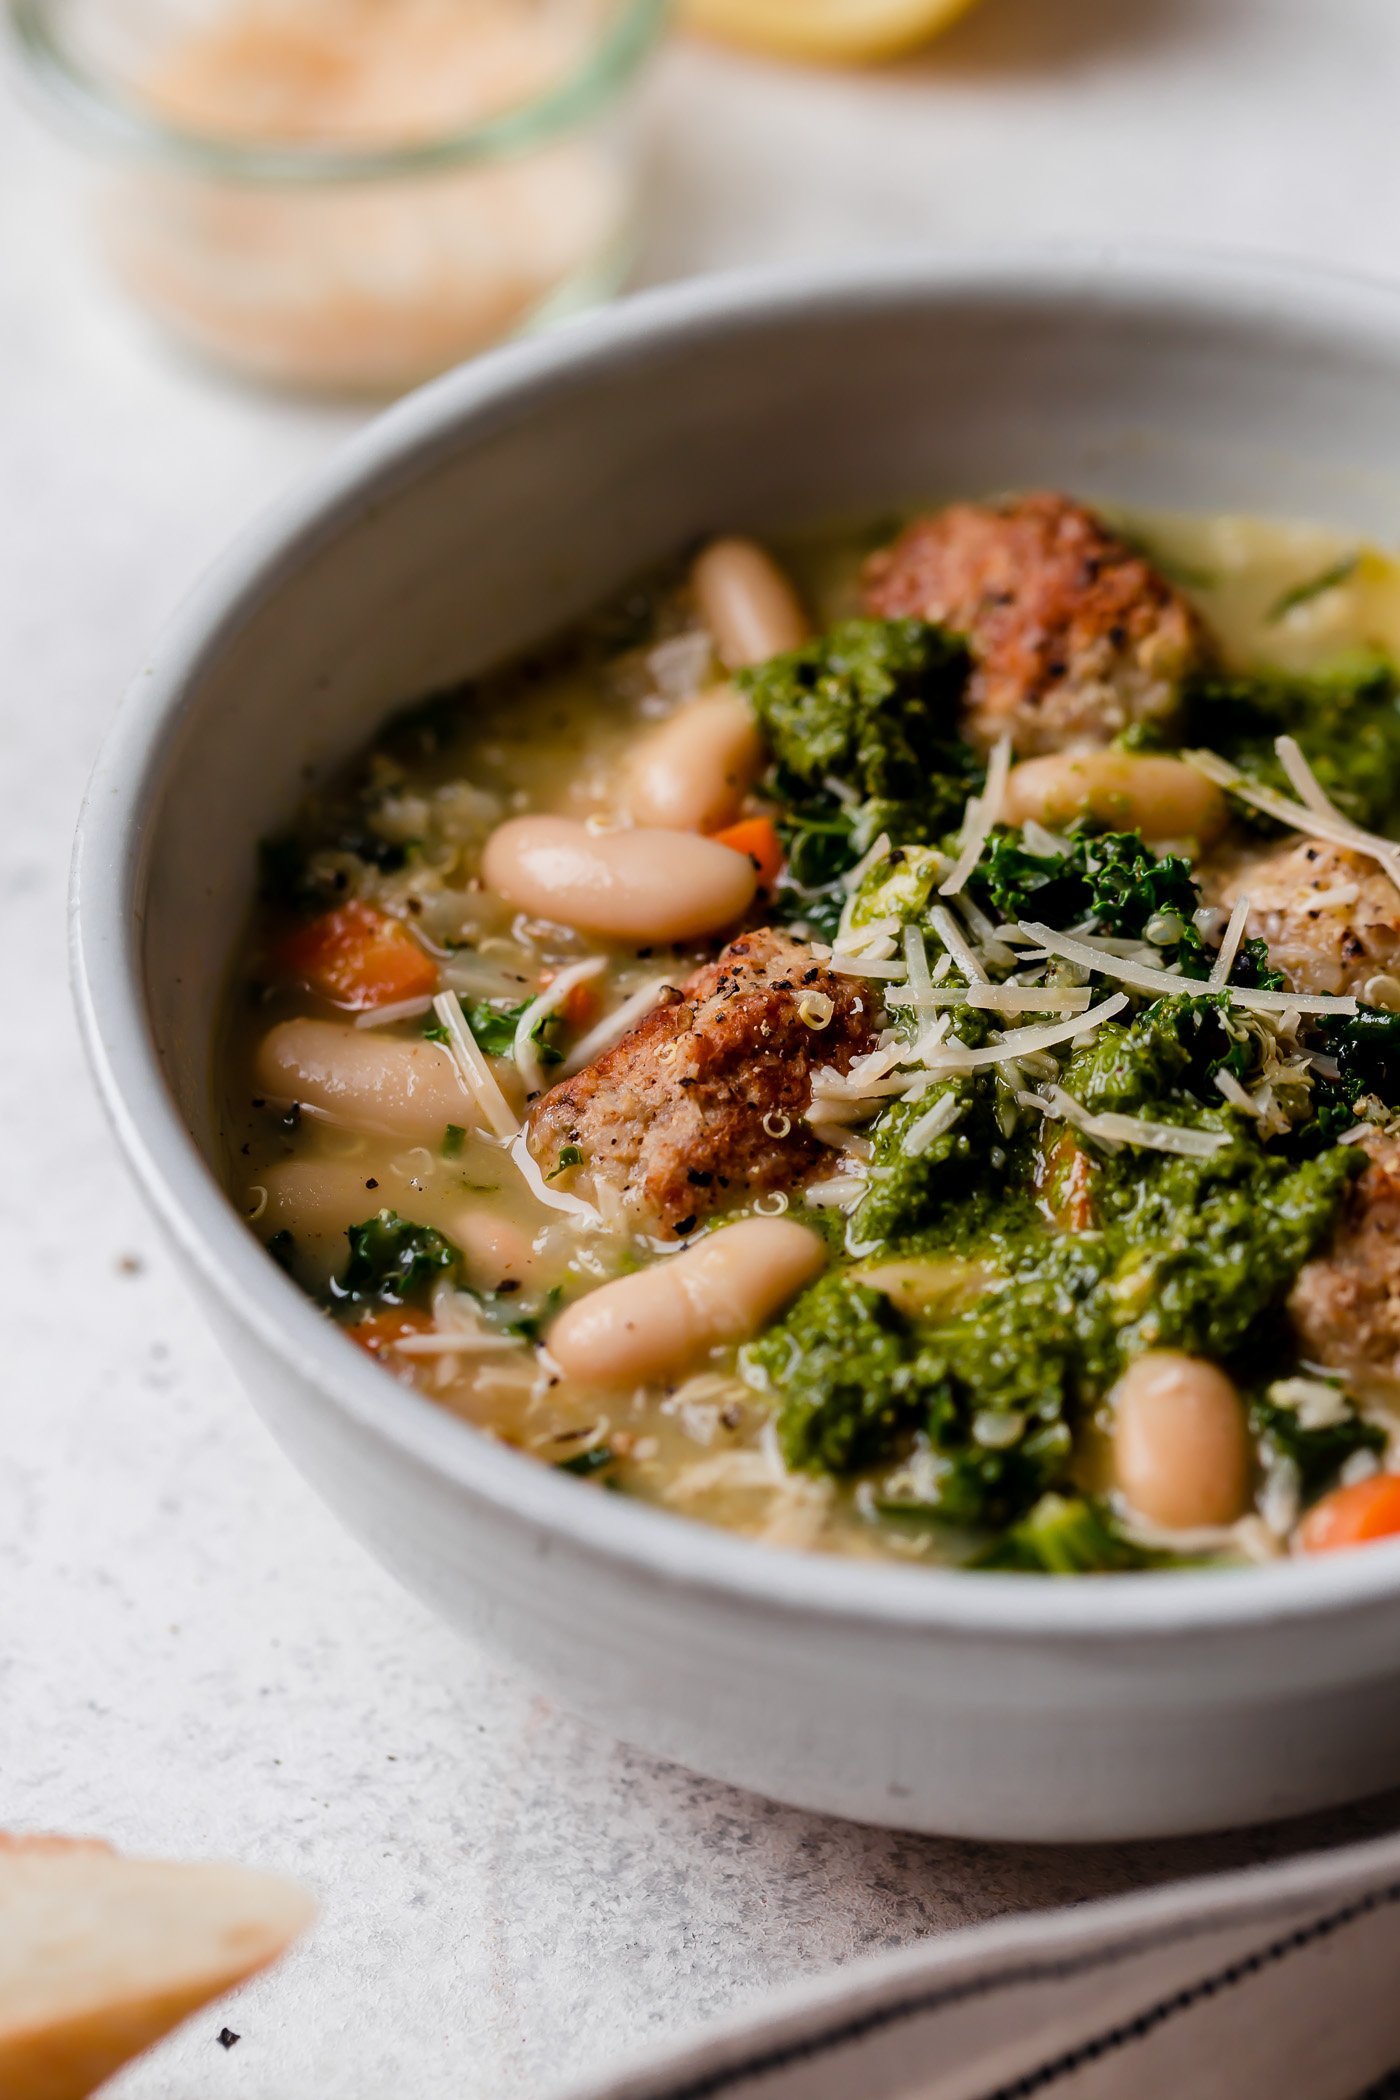 a healthy italian wedding soup recipe, made with tender chicken meatballs, quinoa, kale & cannellini beans. this lightened-up italian wedding soup gets an extra punch of flavor from lemon juice & lots of pesto, making it a cozy & comforting soup & fresh easy weeknight dinner all at once! #playswellwithbutter #italianweddingsoup #italianweddingsouprecipe #easyitalianweddingsoup #chickenmeatballsoup #chickenmeatballs #souprecipes #comfortfood #comfortfooddinners #soup #italianrecipes #italiansoup